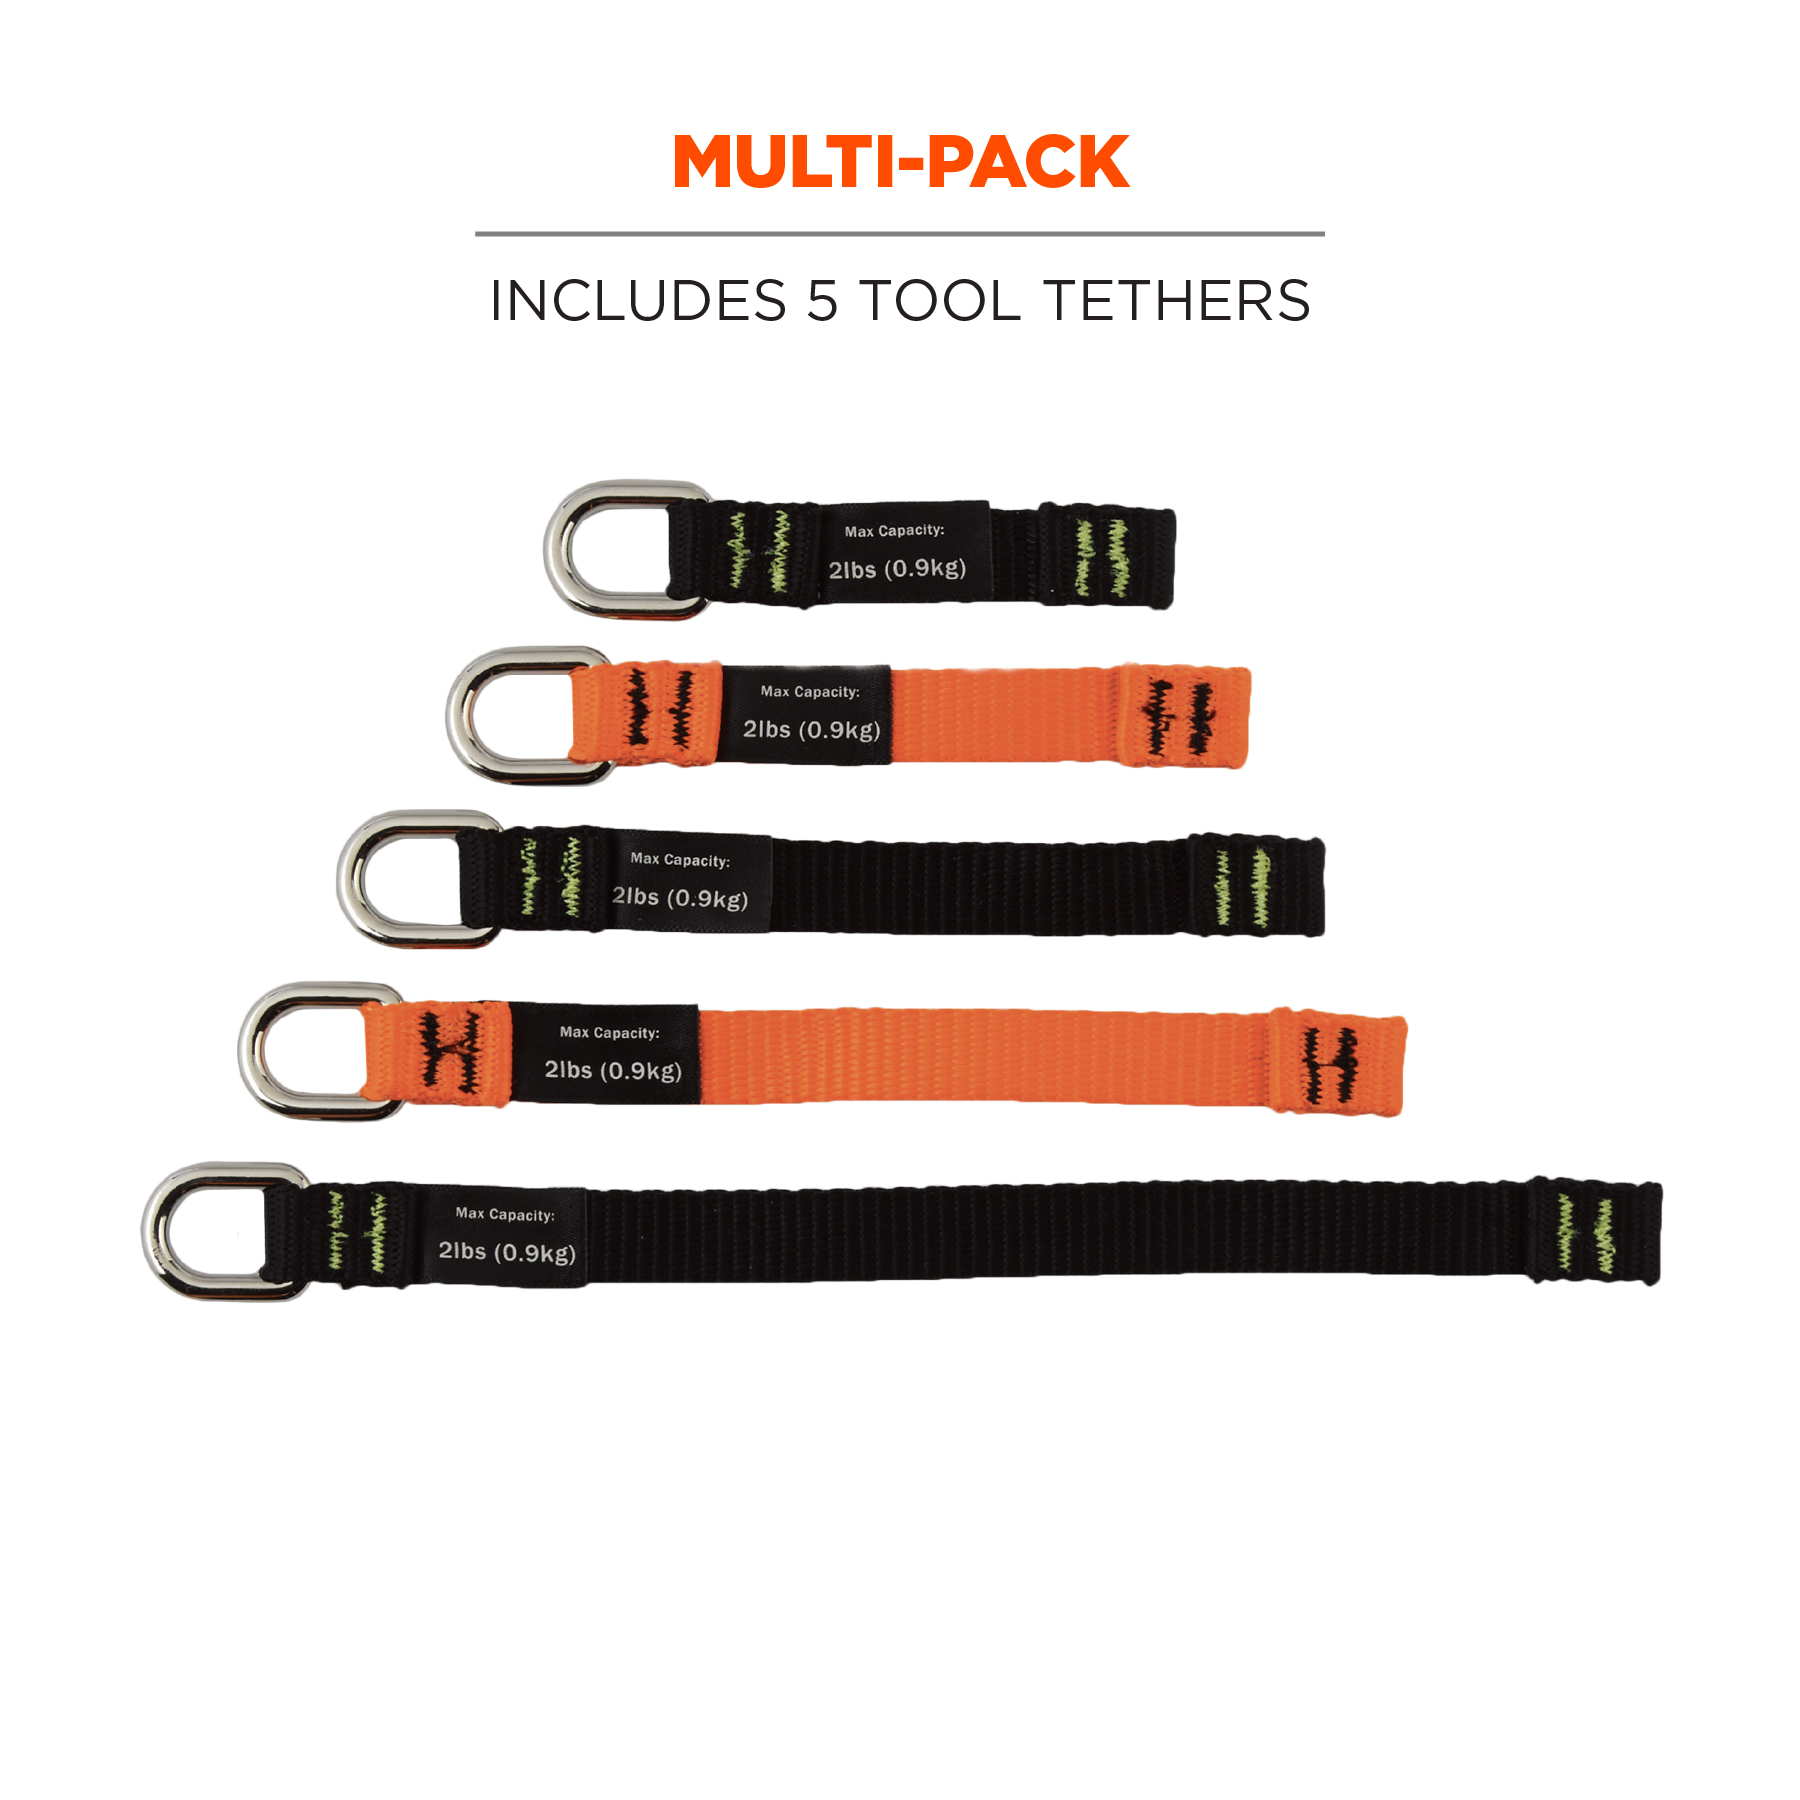 Tool Lanyard with D Hook, 3 Pack 24 Inch Safety Tool Leash 0.8 Width,  Orange